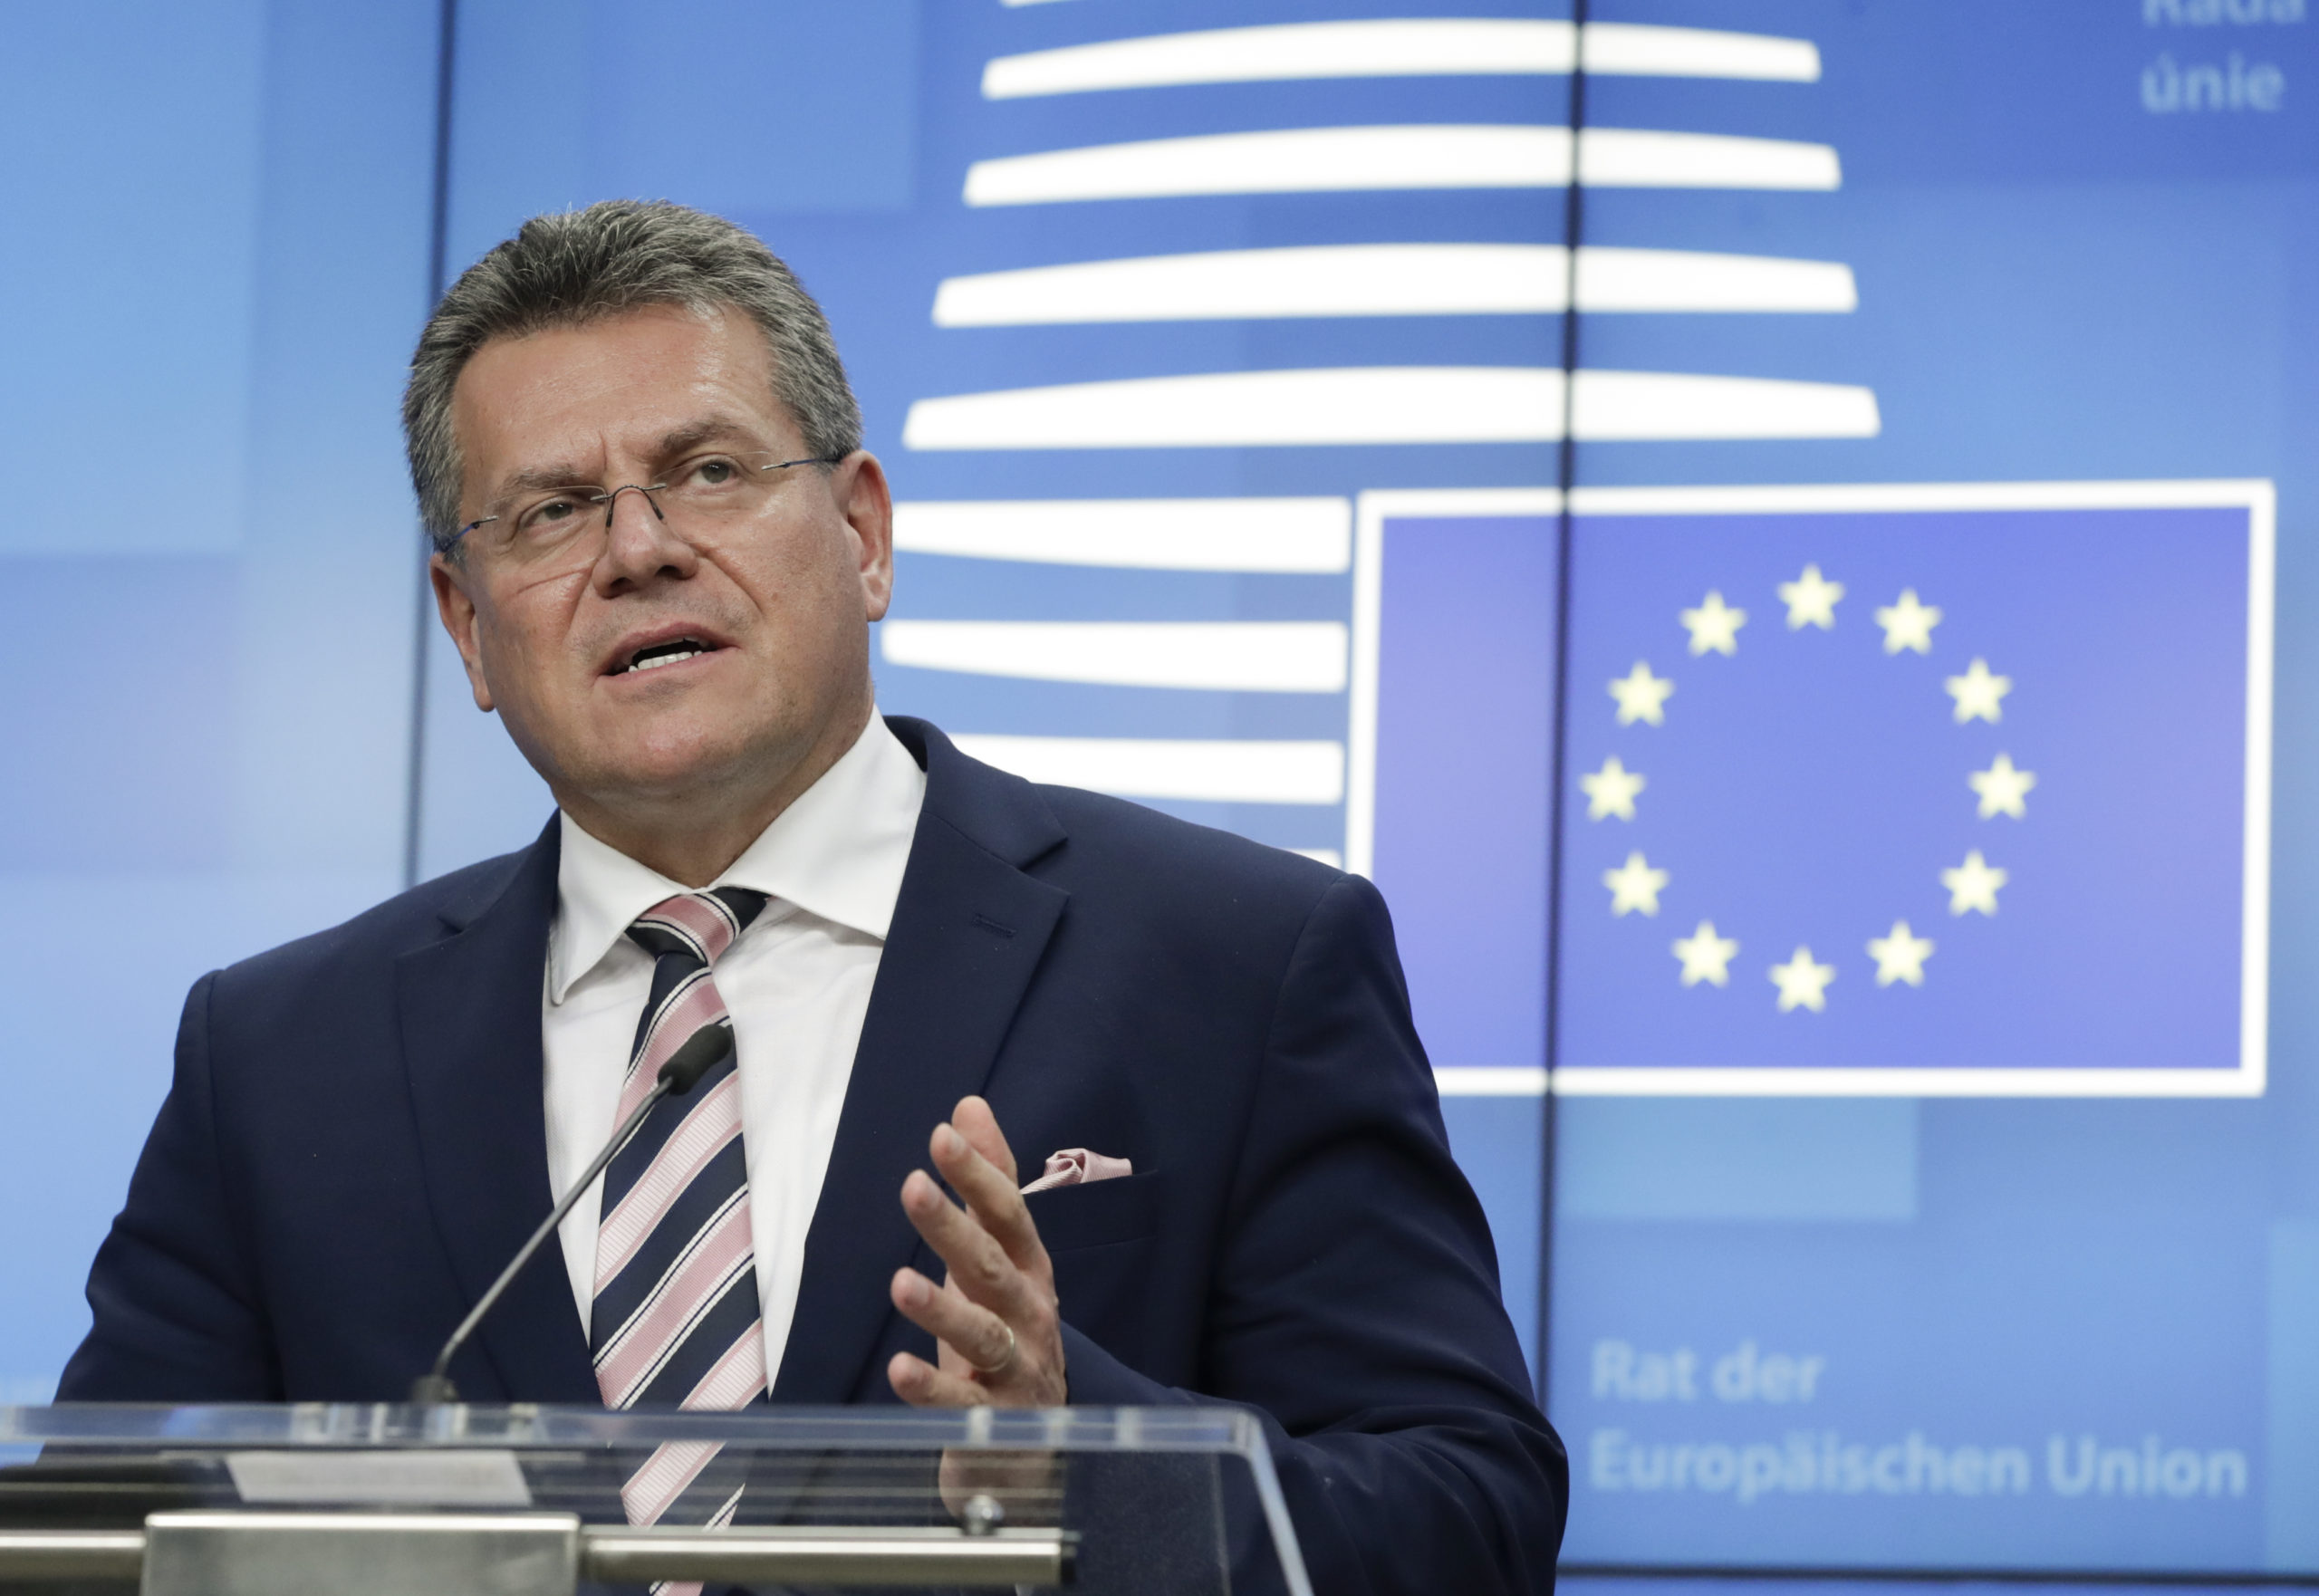 Sefcovic: ‘EU on course to be battery independent by 2025’